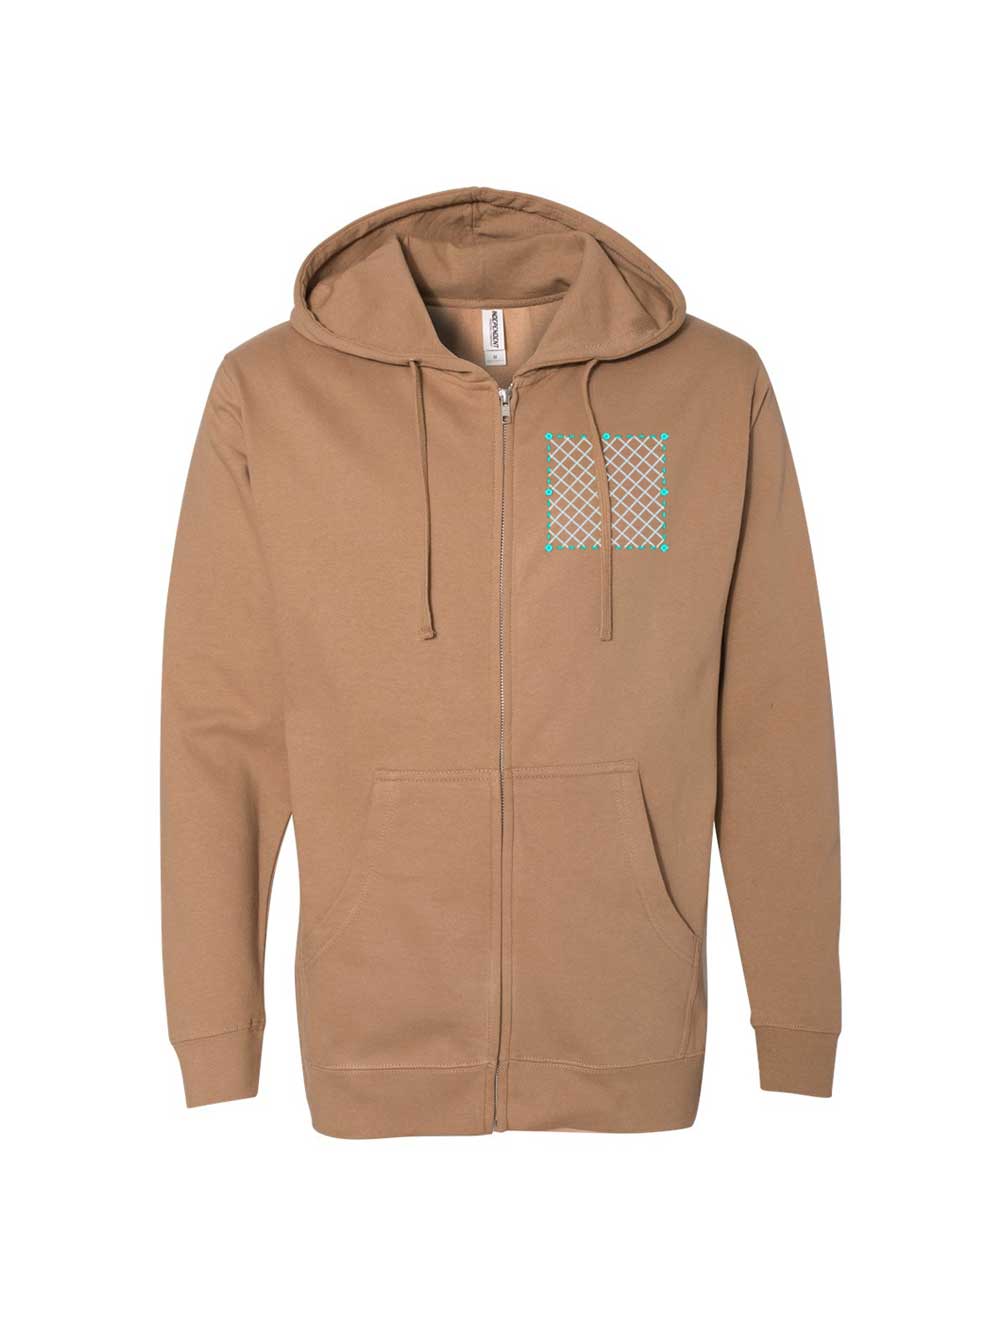 Embroidered Independent Midweight Hooded Full-Zip Sweatshirt